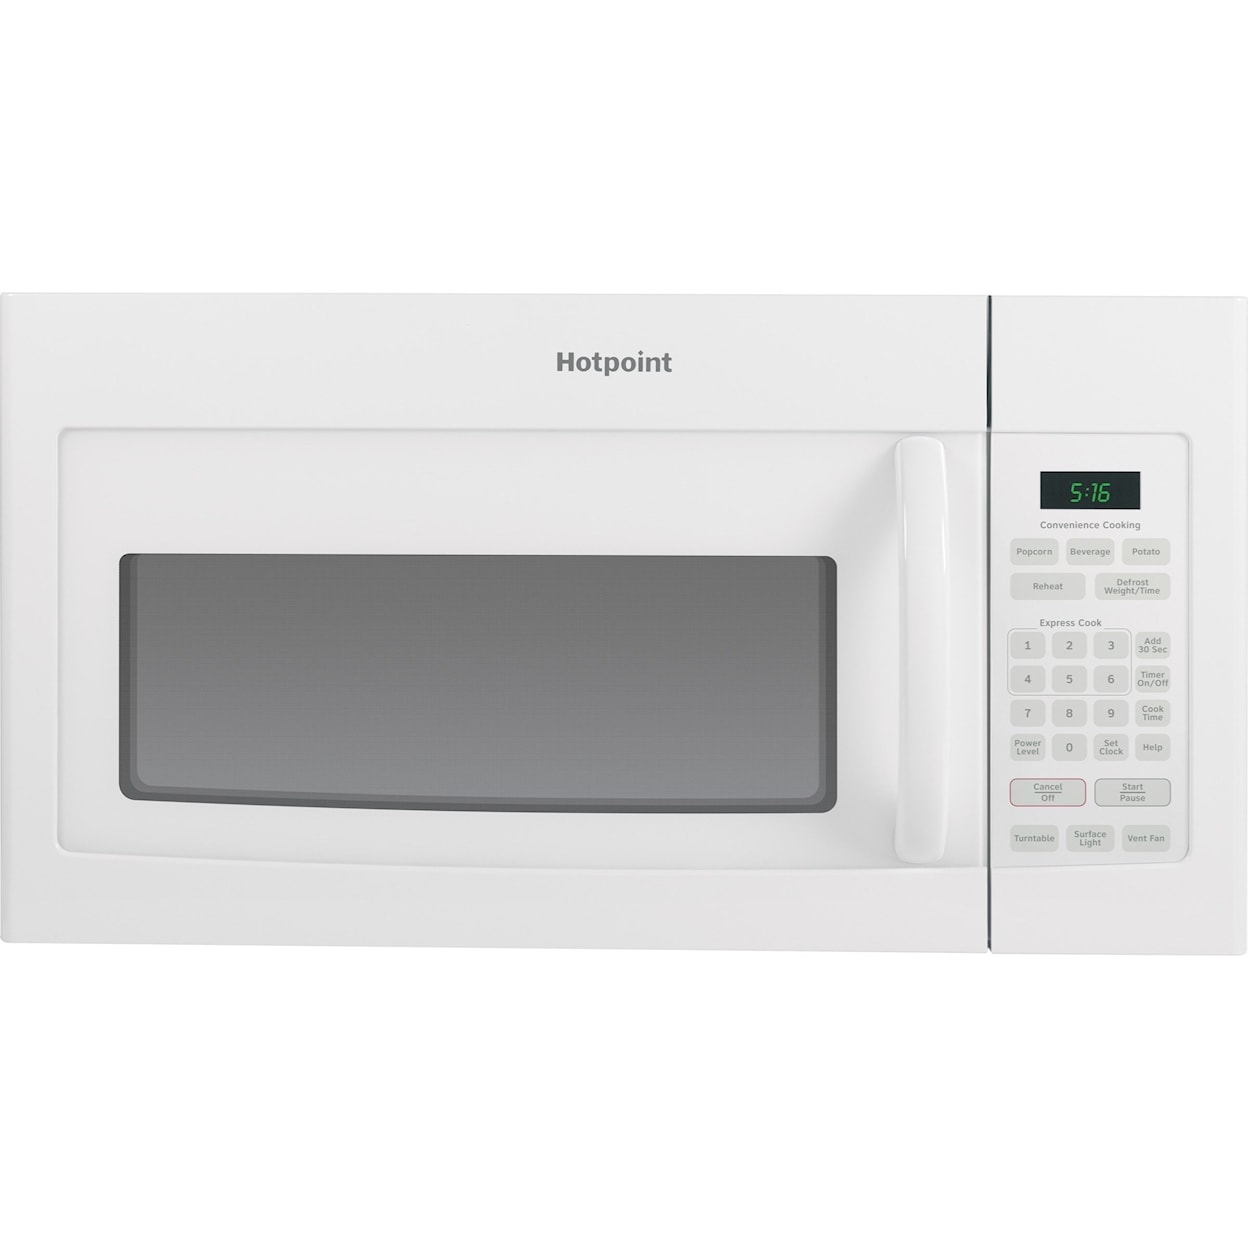 GE Appliances Hotpoint Microwave Oven Hotpoint® 1.6 Cu. Ft. Microwave